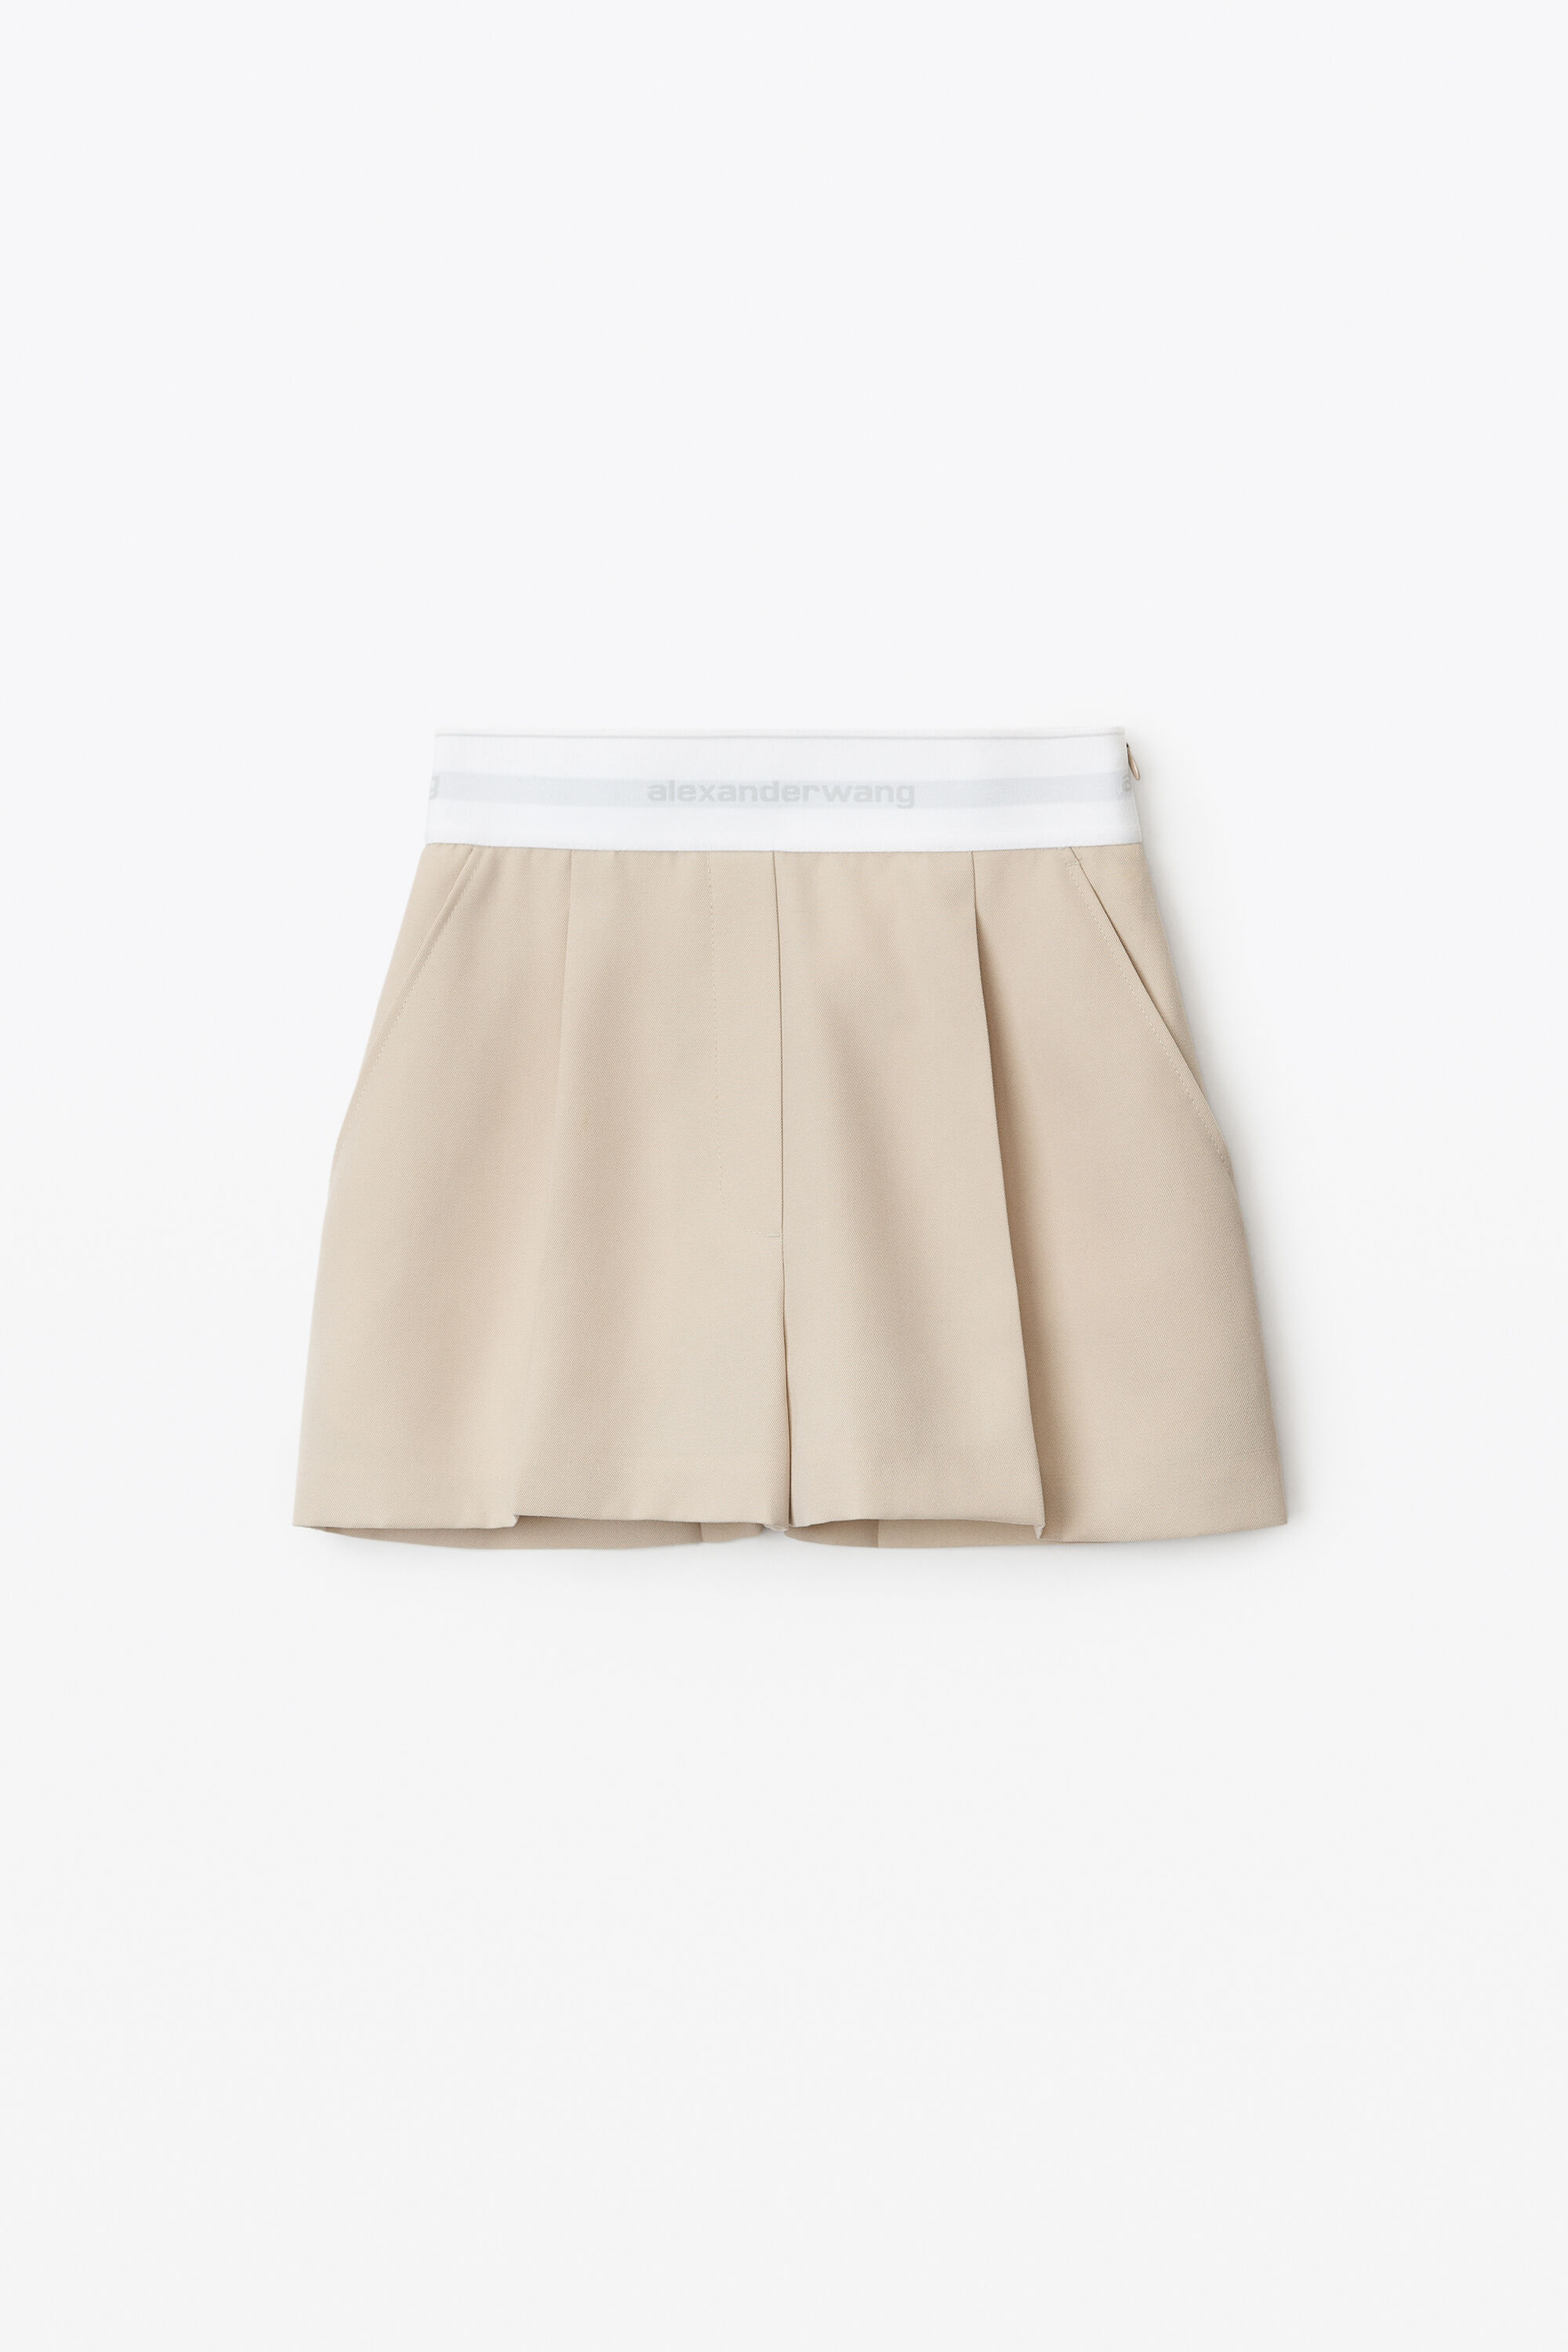 alexanderwang PLEATED SHORTS IN WOOL TAILORING FEATHER